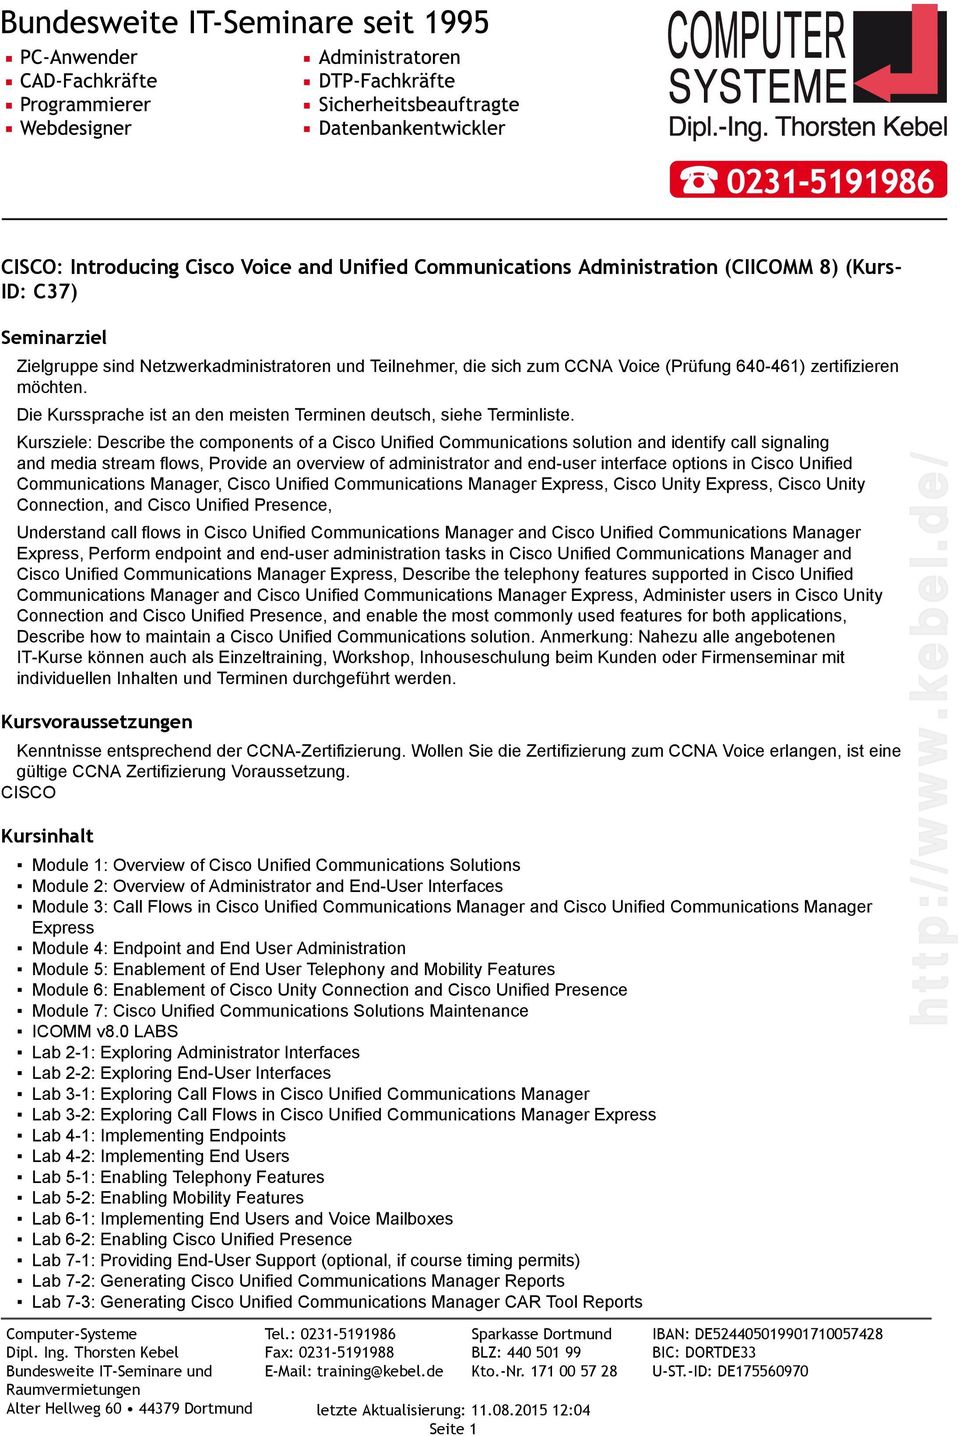 Kursziele: Describe the components of a Cisco Unified Communications solution and identify call signaling and media stream flows, Provide an overview of administrator and end-user interface options